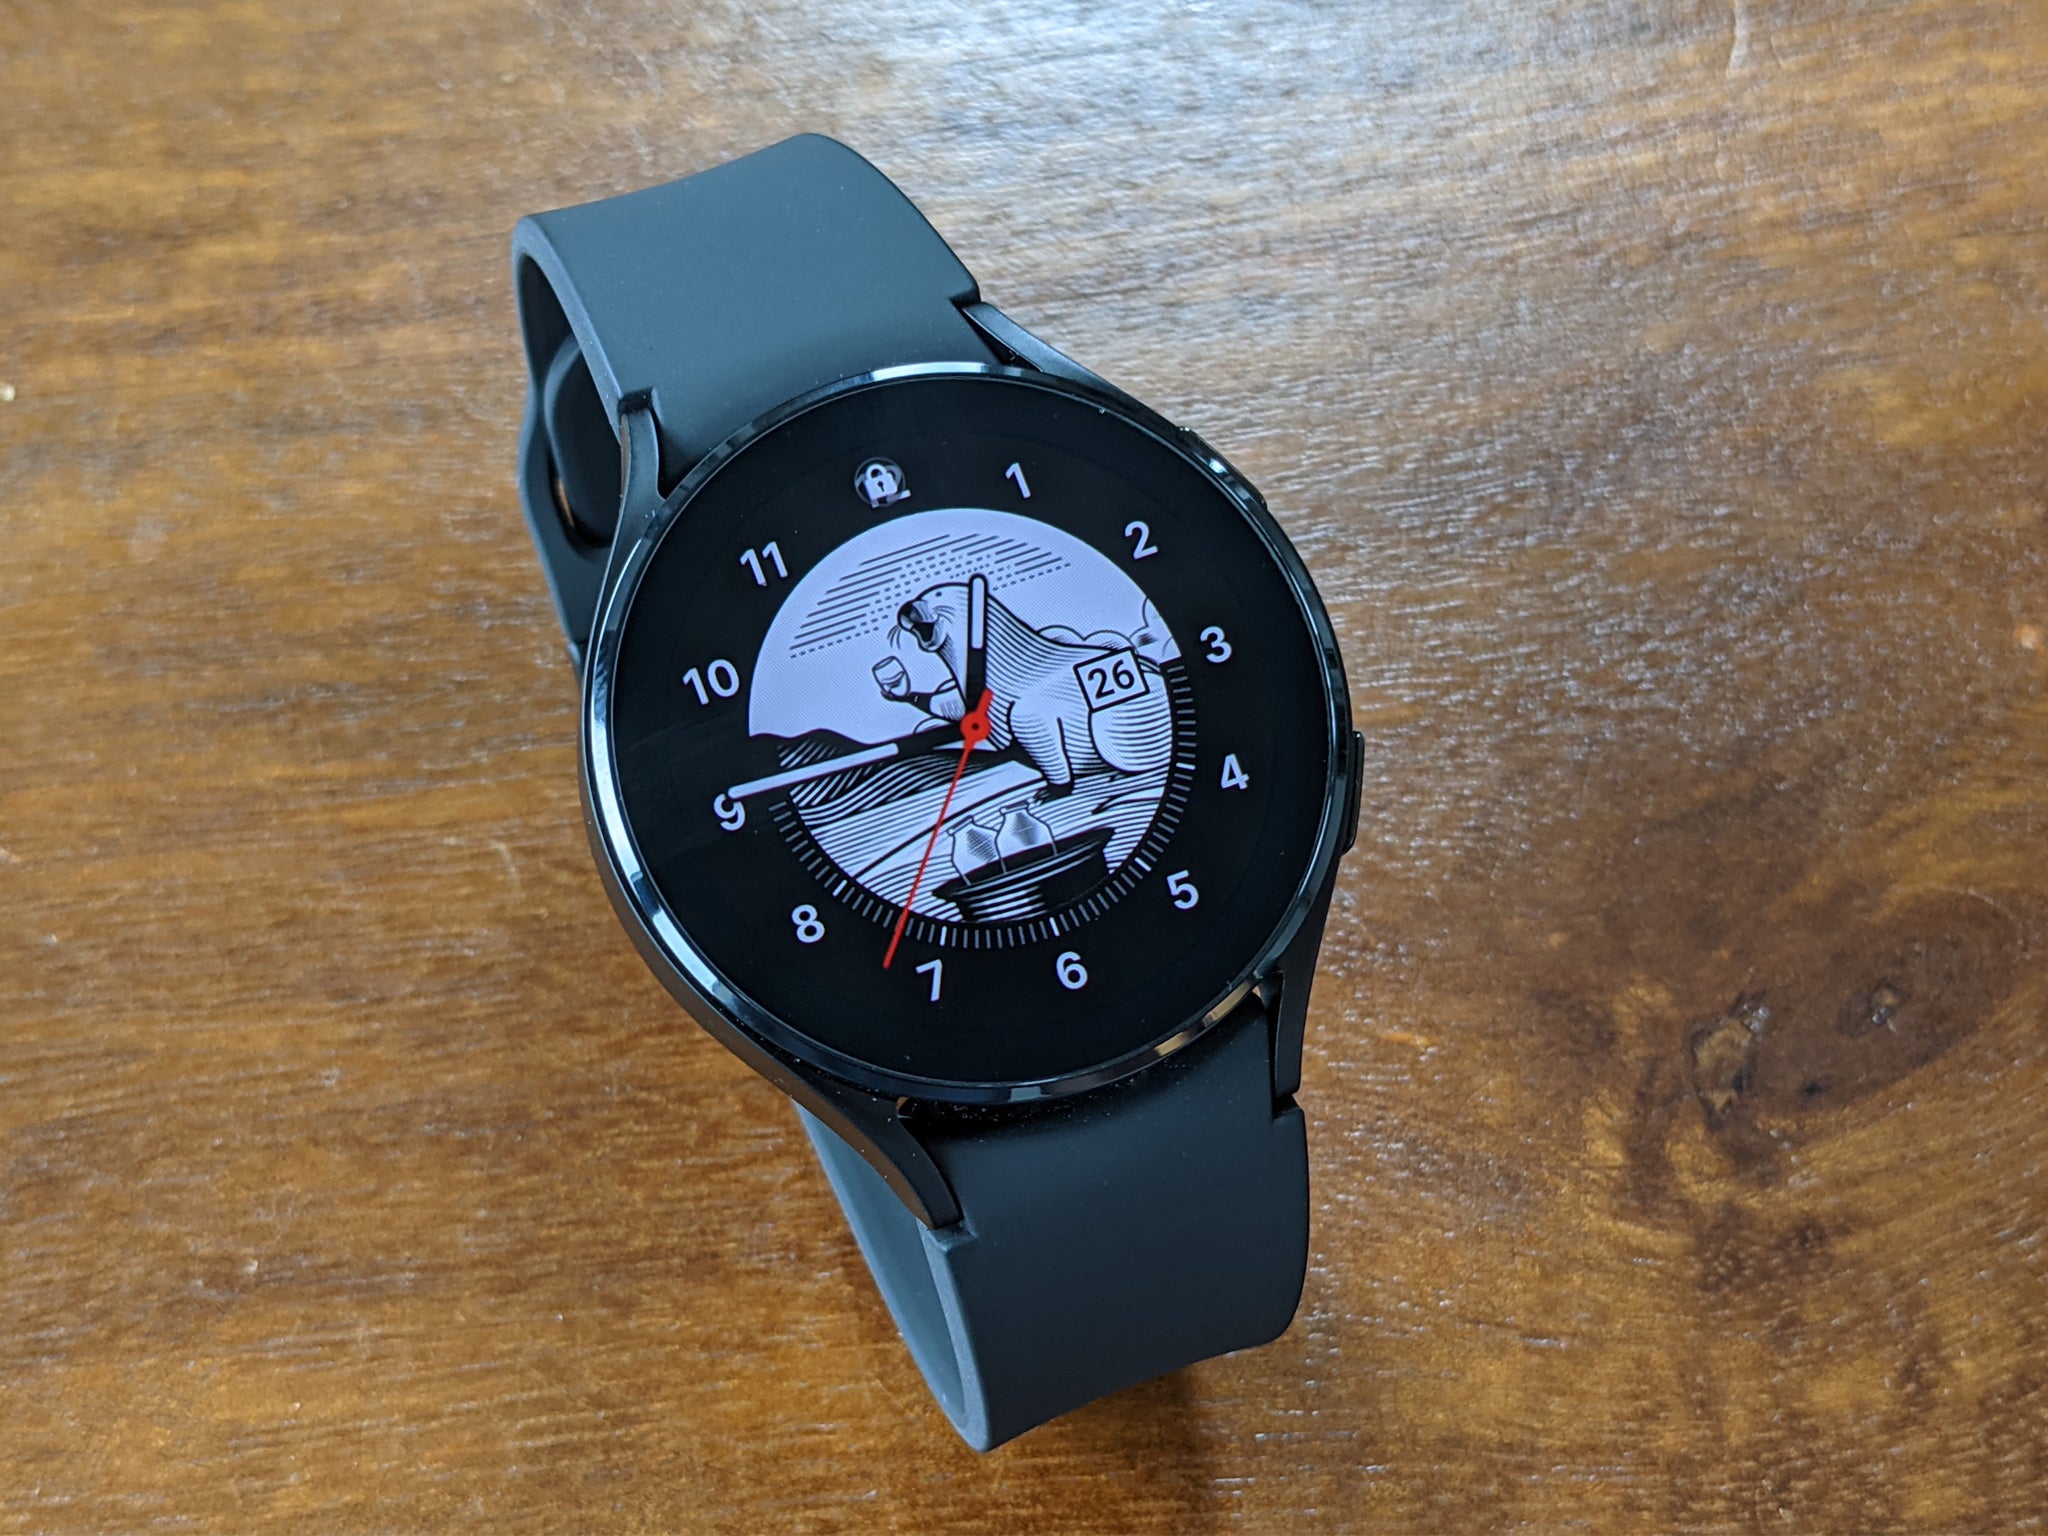 Samsung Galaxy Watch 4 review: The first take of a great future